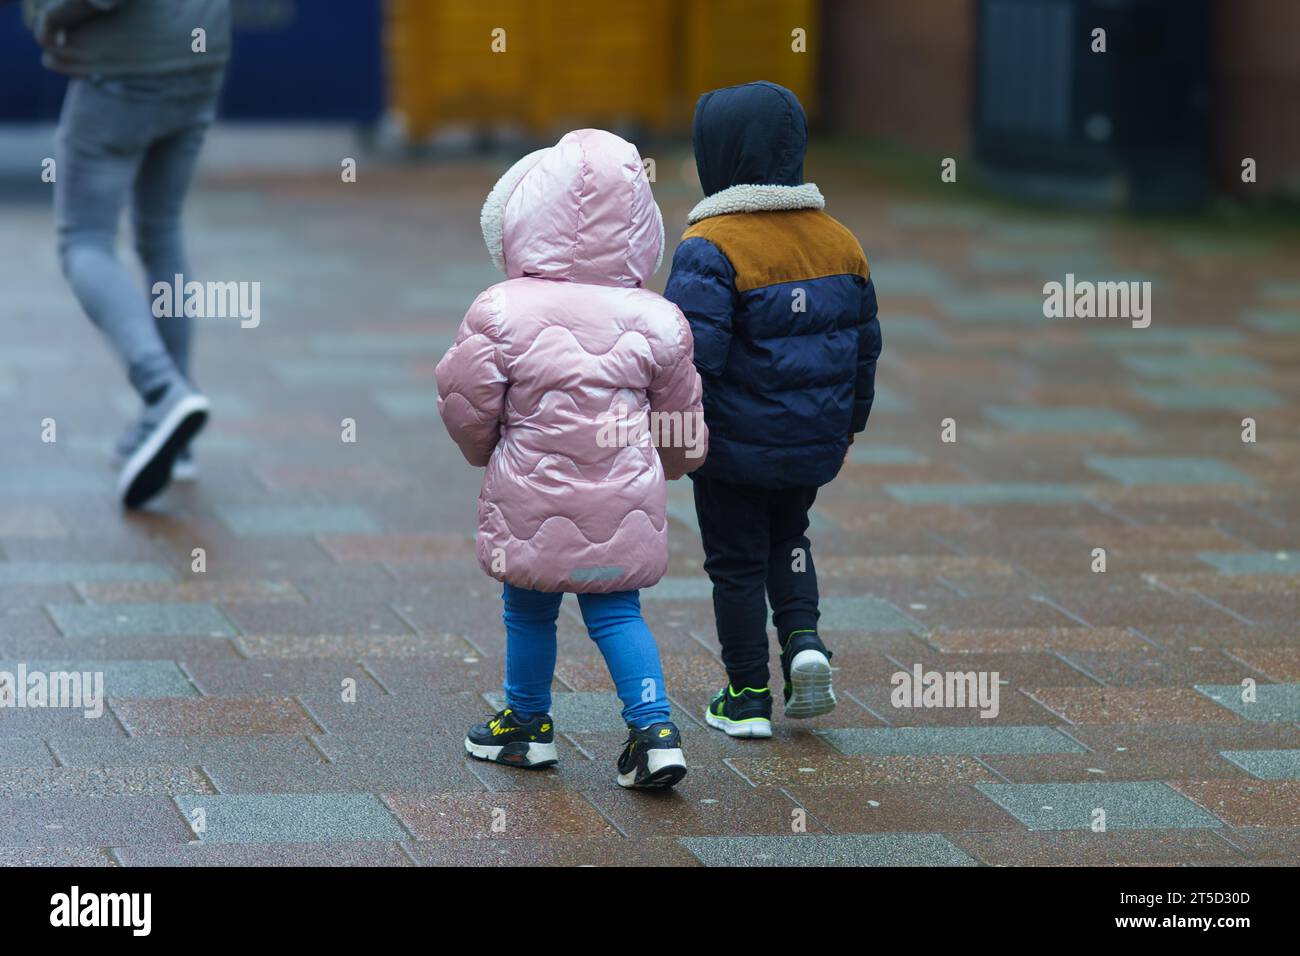 Two young children (a boy and girl) dressed for winter, walk hand in hand behind an adult carer Stock Photo